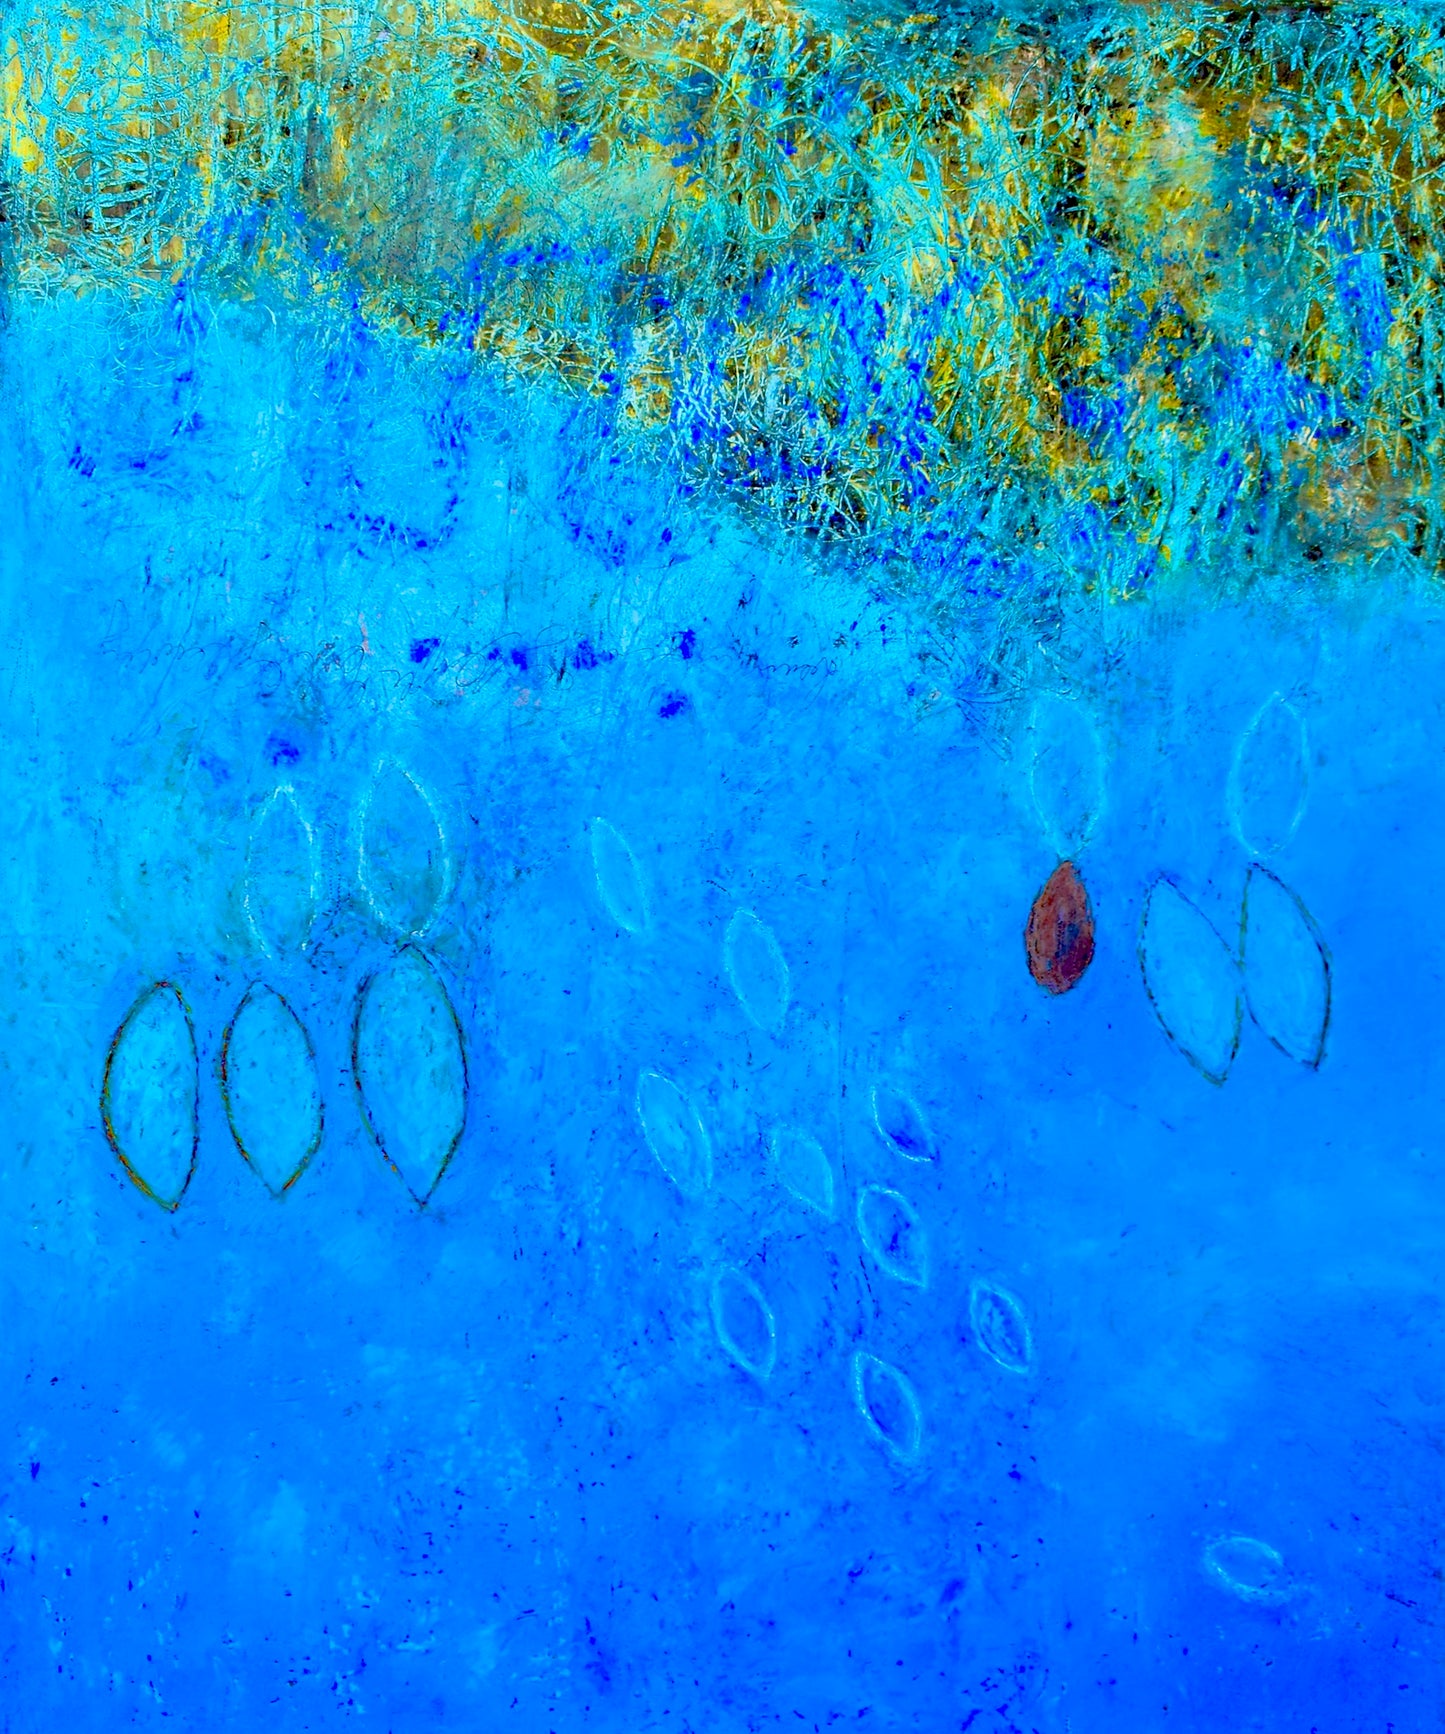 Water, 2020, mixed media on canvas, 24 x 20 in. / 60.96 x 50.8 cm.